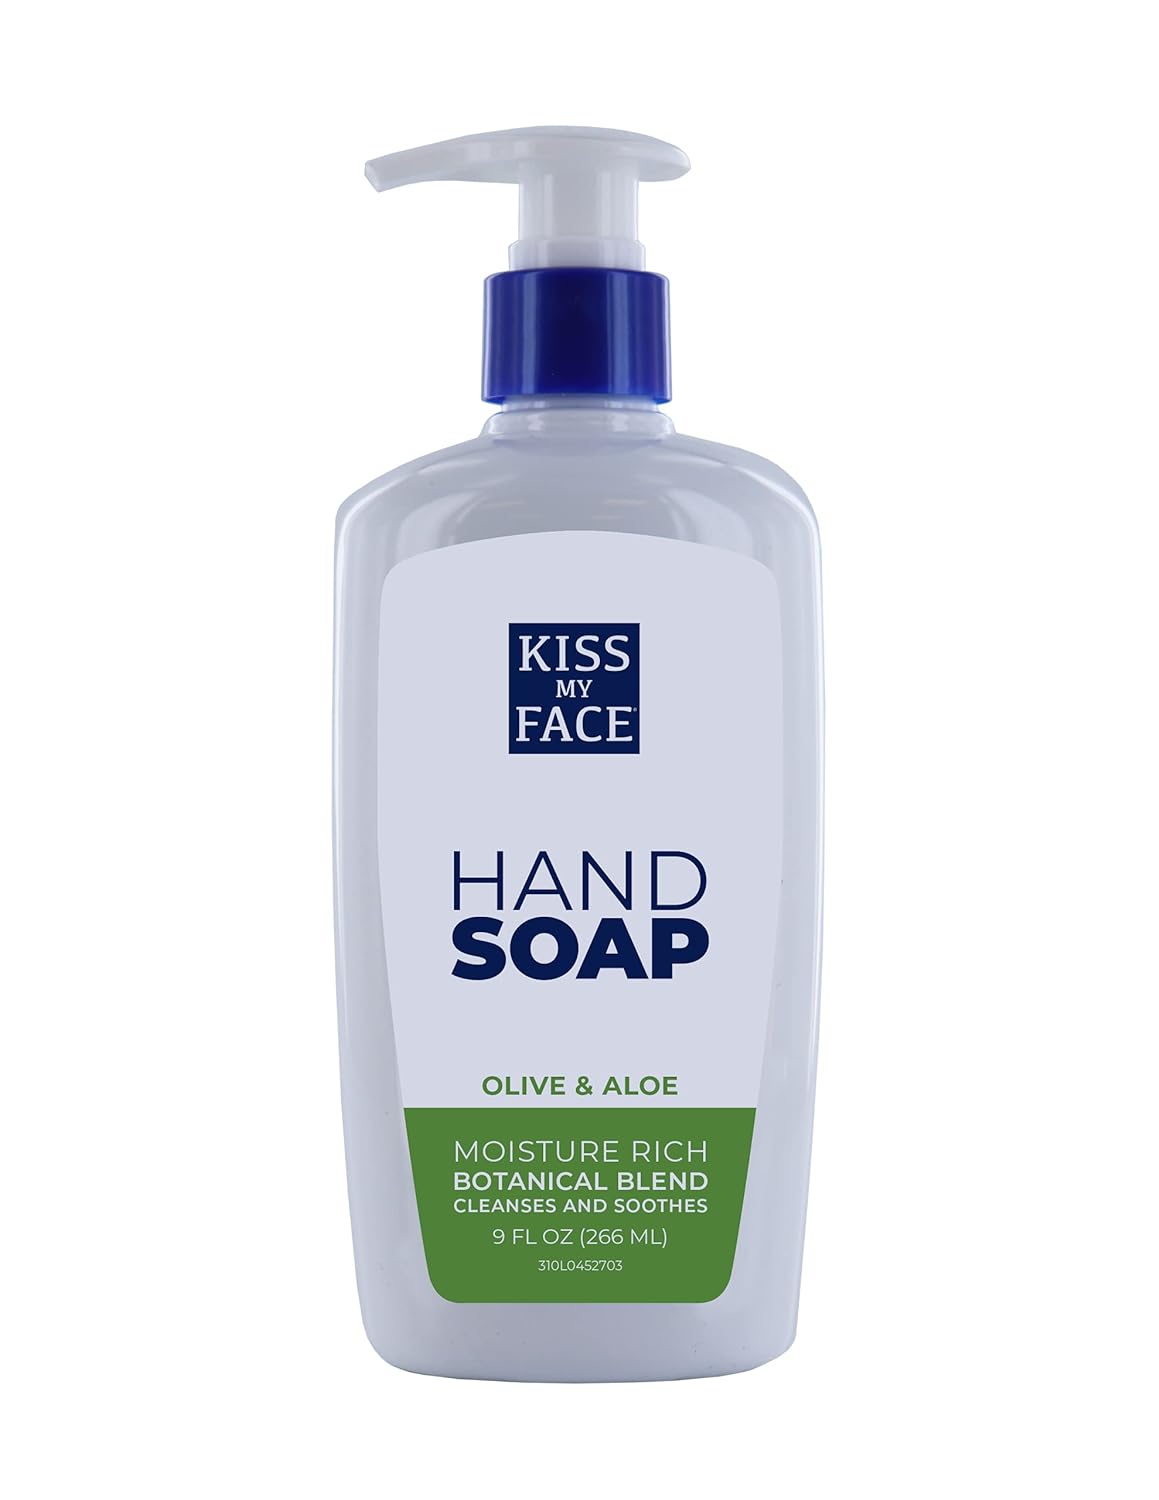 Kiss My Face Moisture Liquid Hand Soap – Vegan and Cruelty Free Hand Wash Soap – 9   Bottle with Pump Dispenser (Olive and Aloe, Pack of 1)